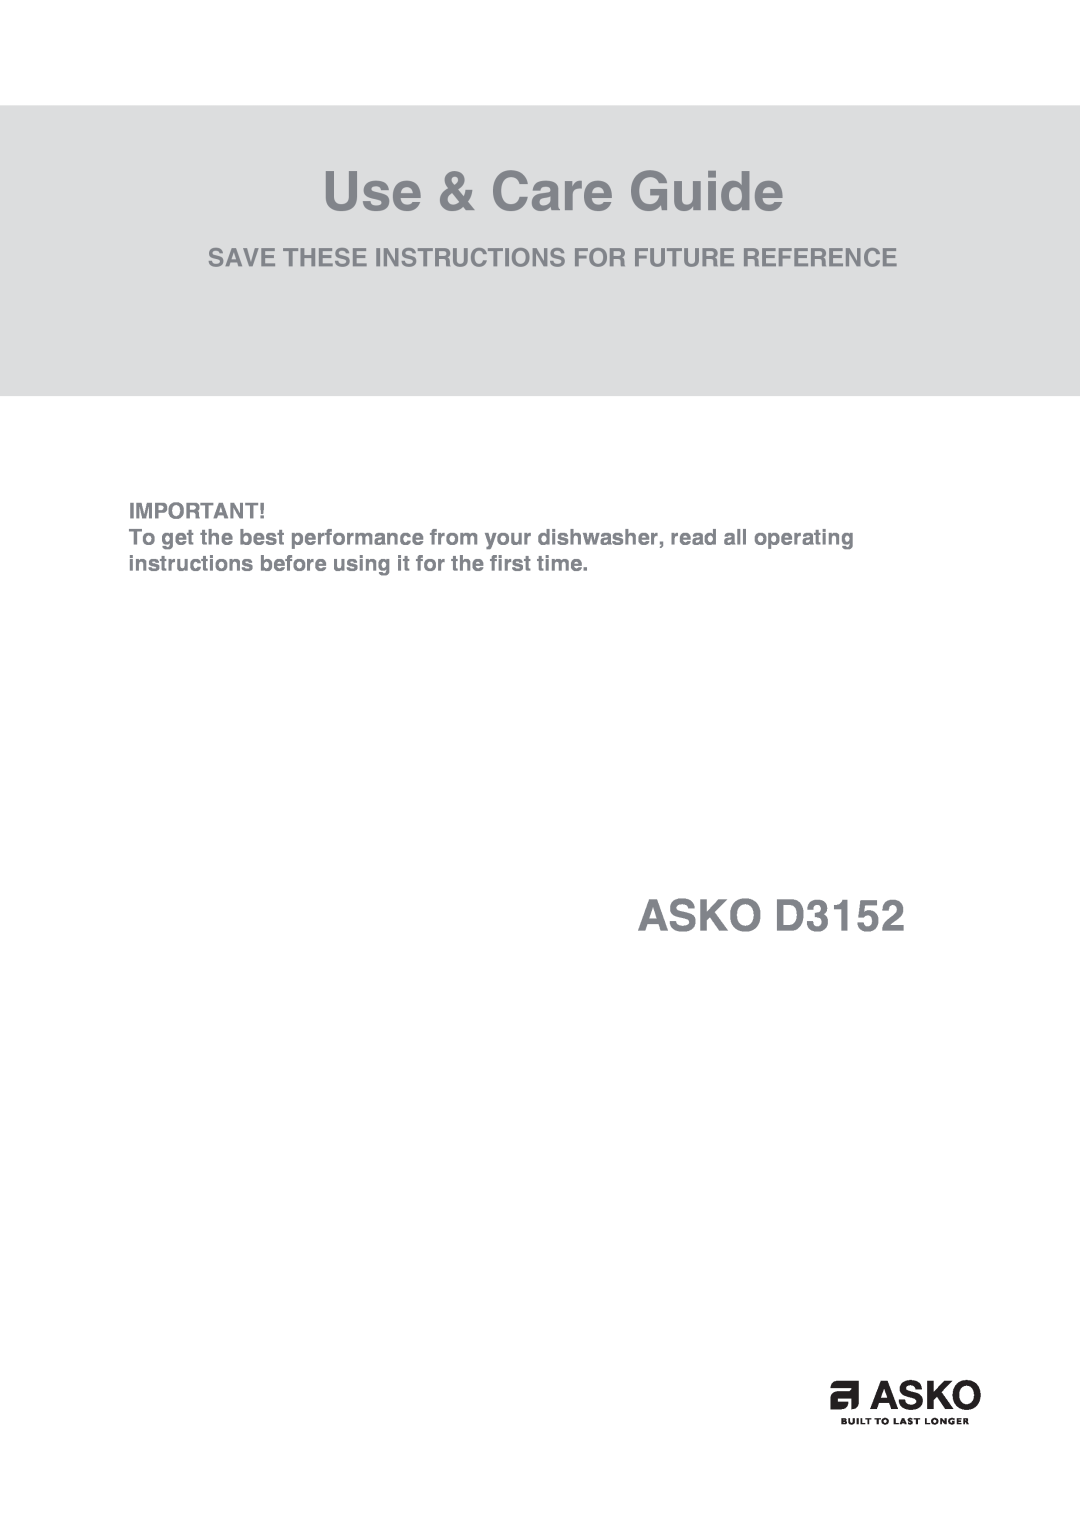 Asko manual Use & Care Guide, ASKO D3152, Save These Instructions For Future Reference 